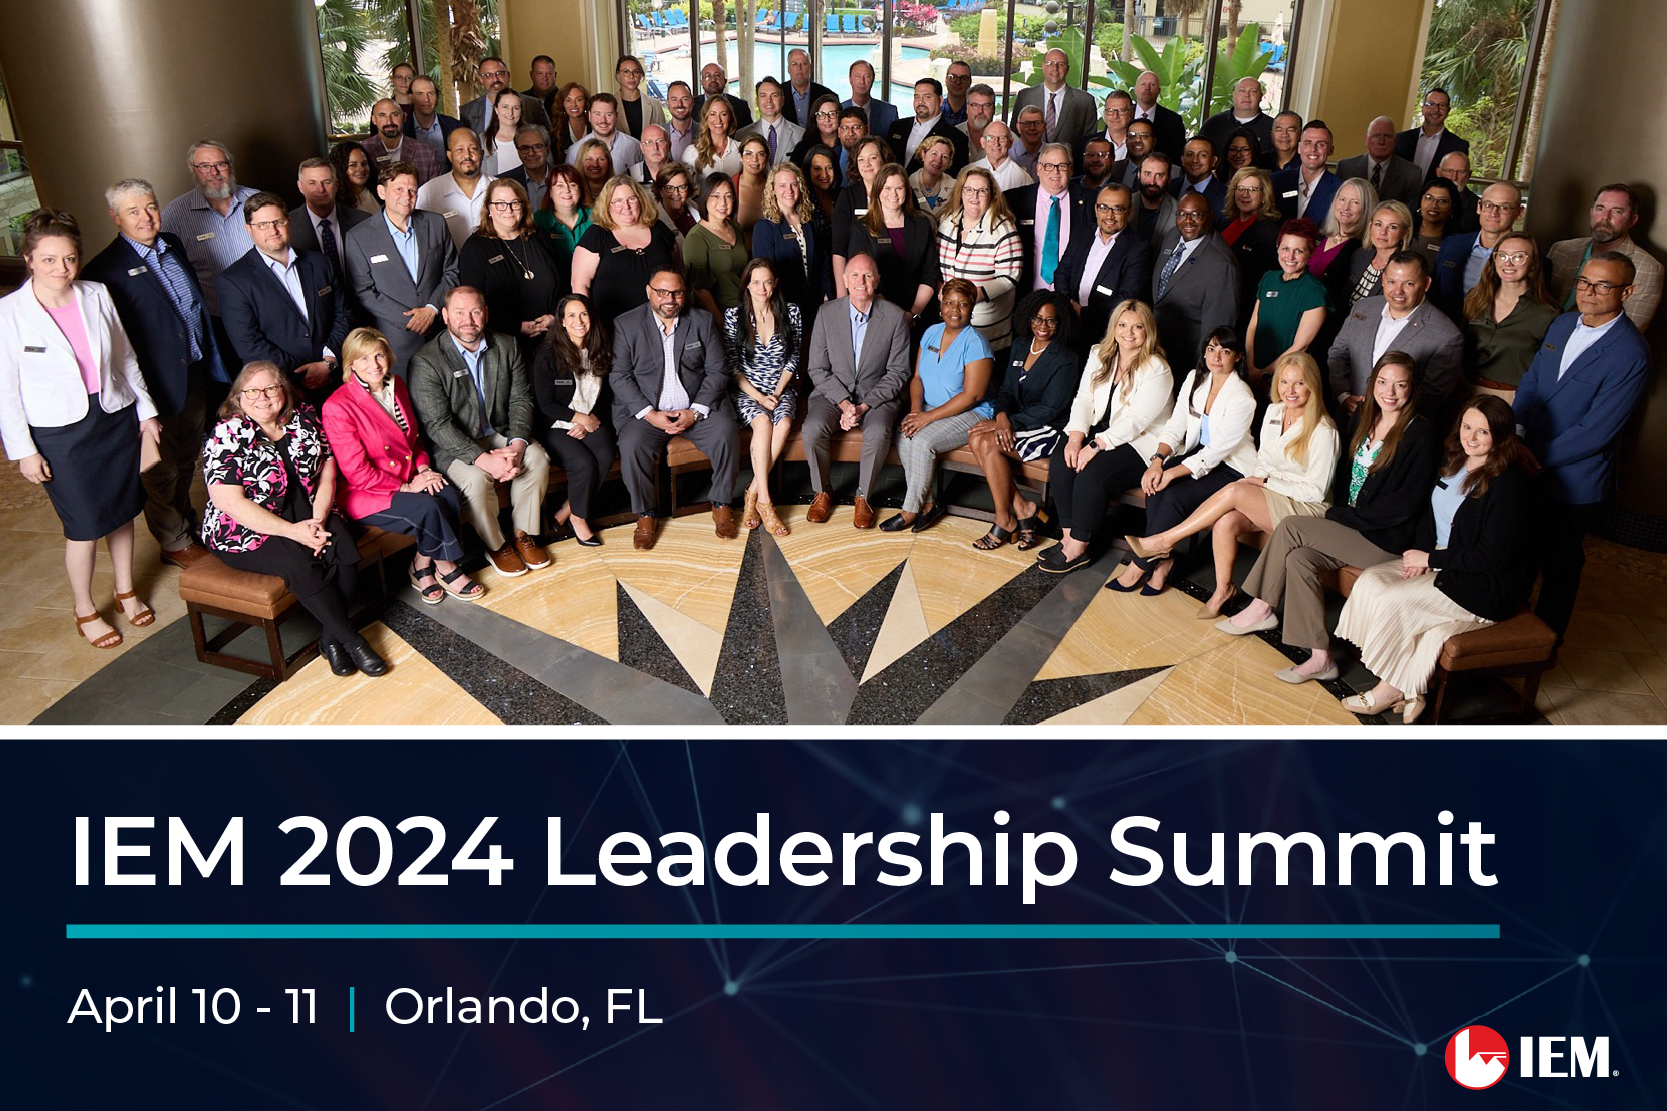 IEM Hosts 2024 Leadership Summit to Foster Growth and Innovation